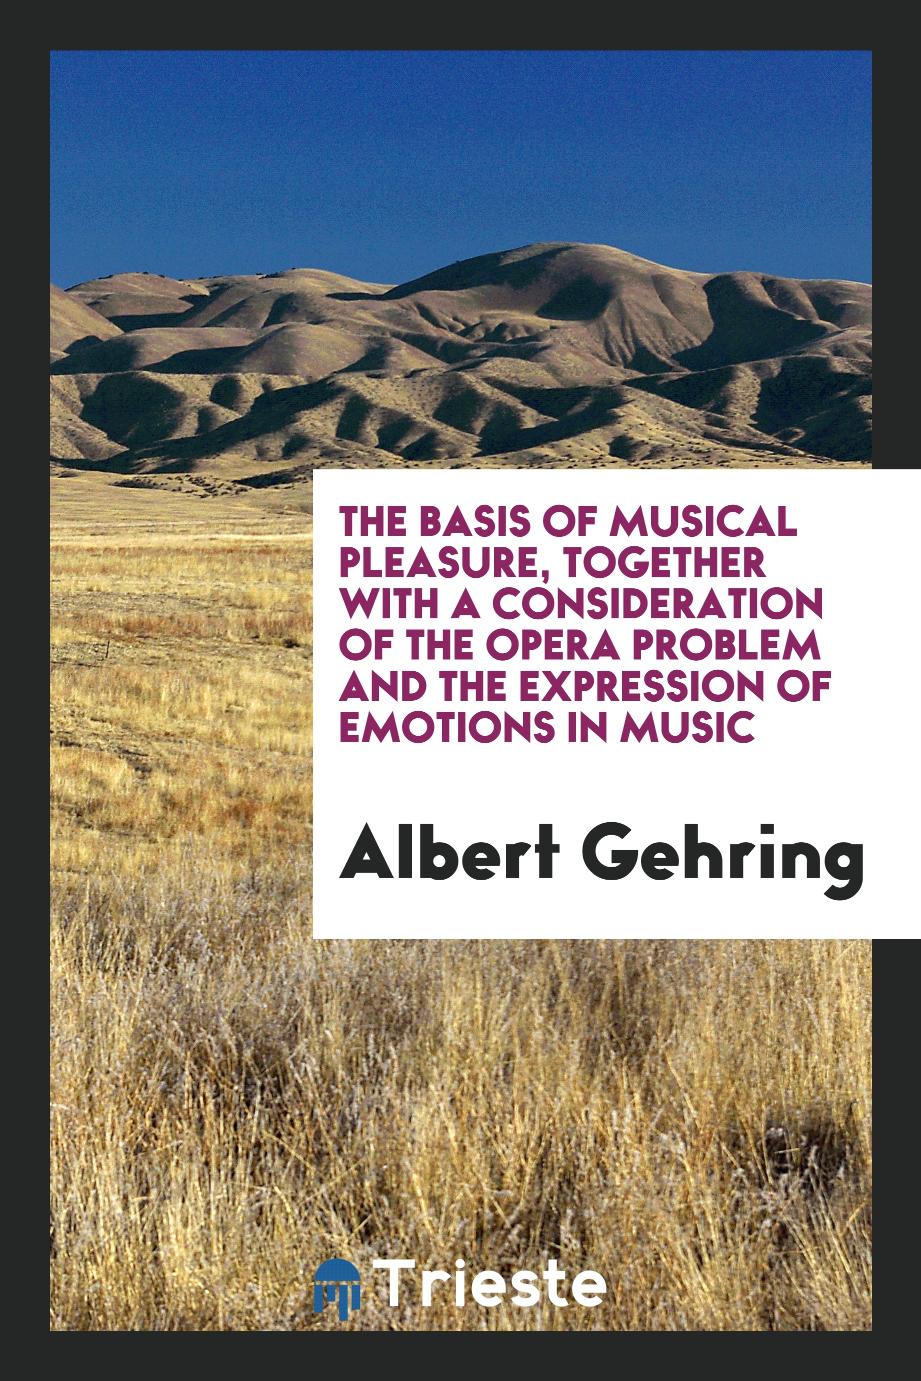 The basis of musical pleasure, together with a consideration of the opera problem and the expression of emotions in music